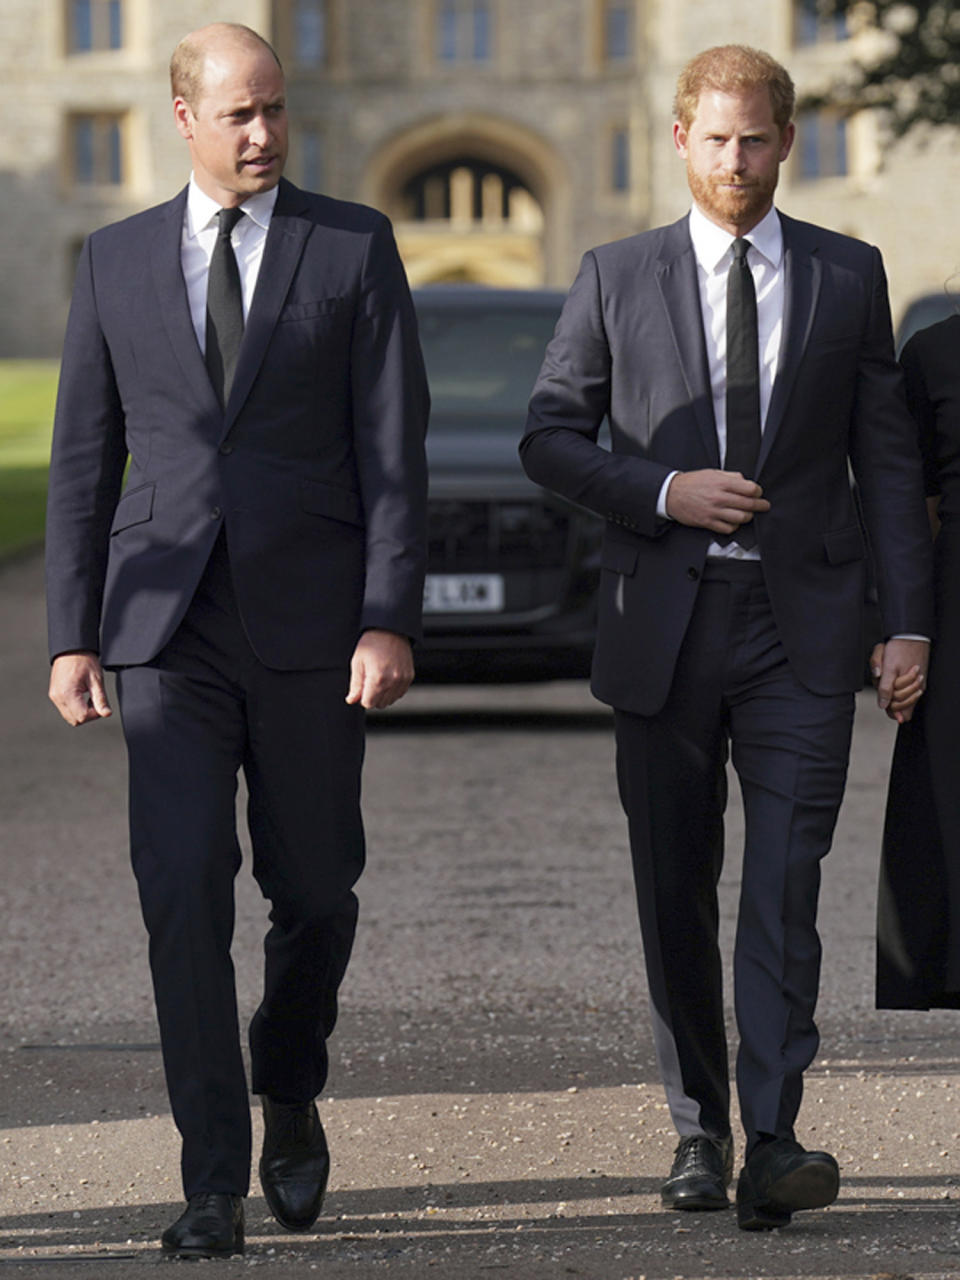 FILE - Britain's Prince William, Prince of Wales, left and Prince Harry walk to meet members of the public at Windsor Castle, following the death of Queen Elizabeth II on Thursday, in Windsor, England, Saturday, Sept. 10, 2022. Prince Harry has said he wants to have his father and brother back and that he wants “a family, not an institution,” during a TV interview ahead of the publication of his memoir. The interview with Britain’s ITV channel is due to be released this Sunday. (Kirsty O'Connor/Pool Photo via AP, File)